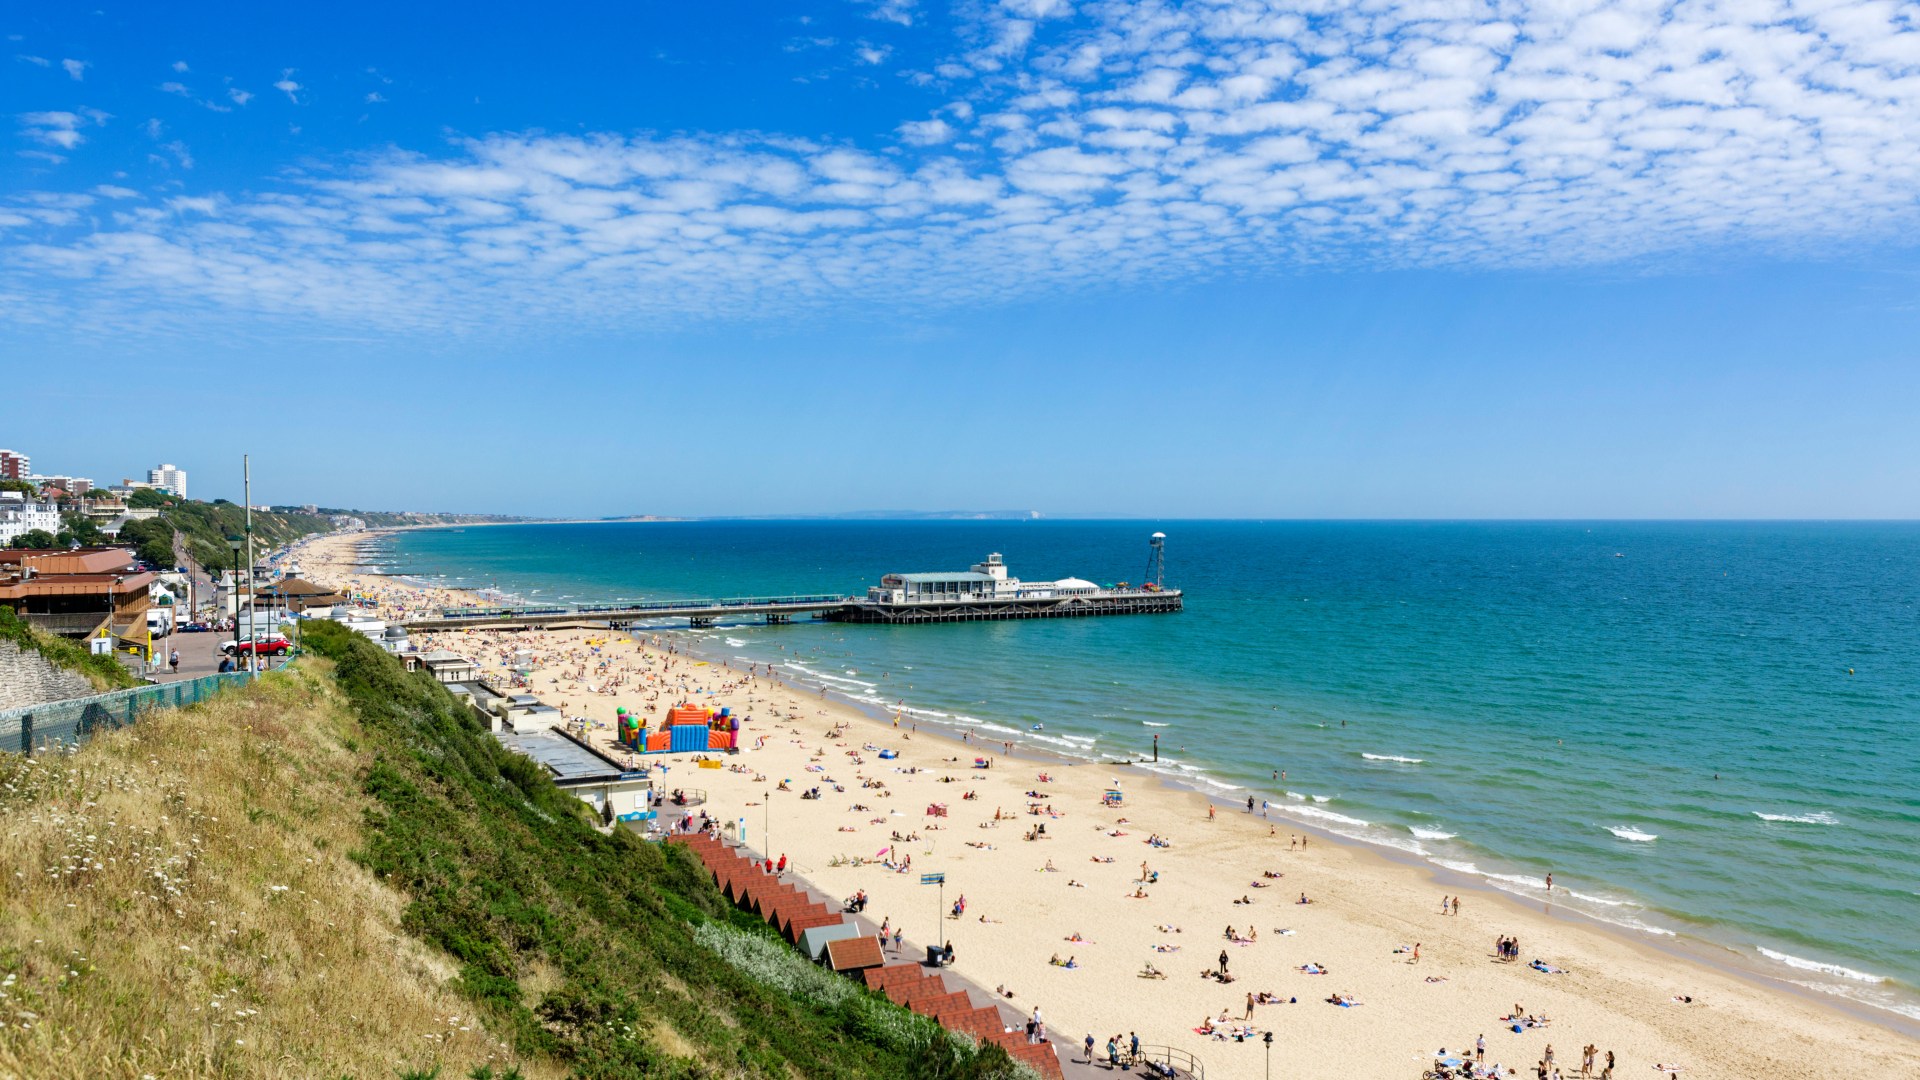 Discover the Top Beaches Worldwide – 4 UK Spots Rank High on the List